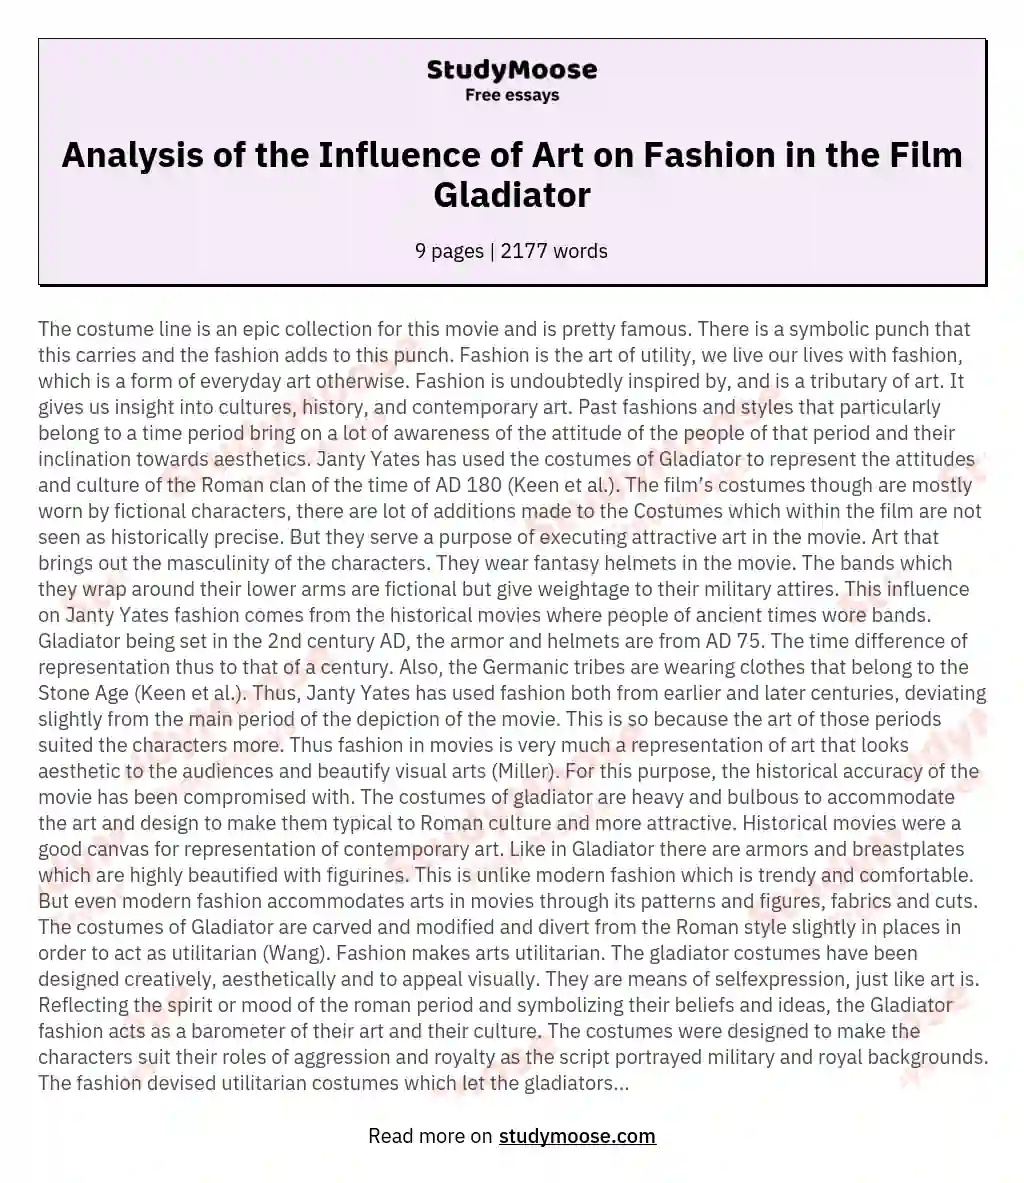 Analysis of the Influence of Art on Fashion in the Film Gladiator essay